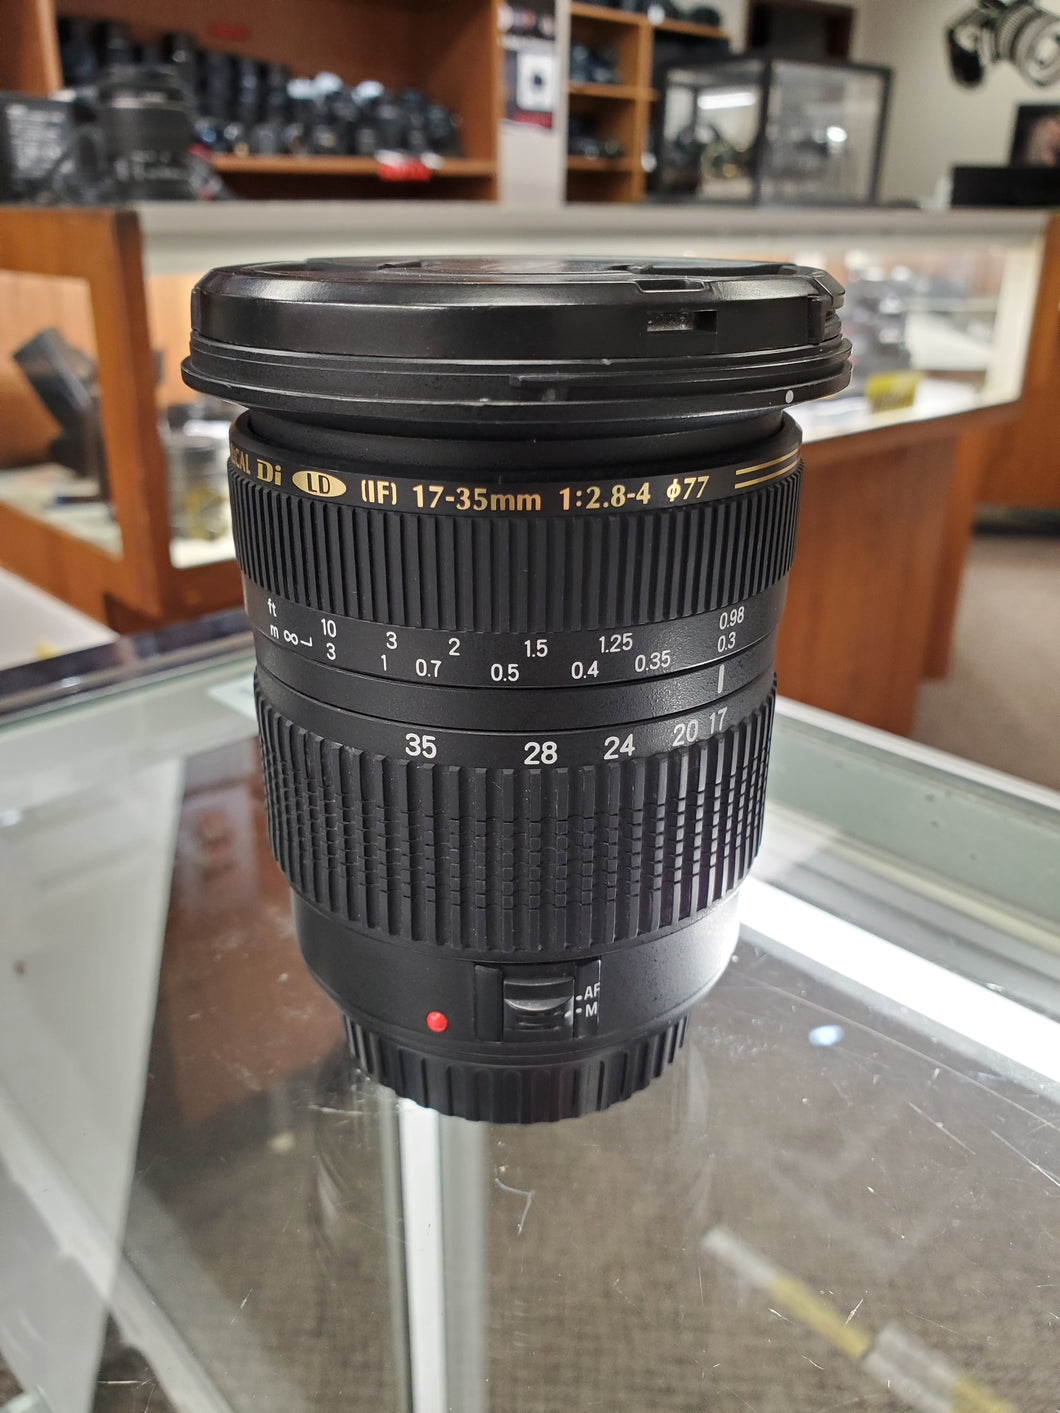 Tamron SP AF 17-35 mm f/2.8-4 Di LD Aspherical (IF) Wide Angle for Canon - Paramount Camera & Repair